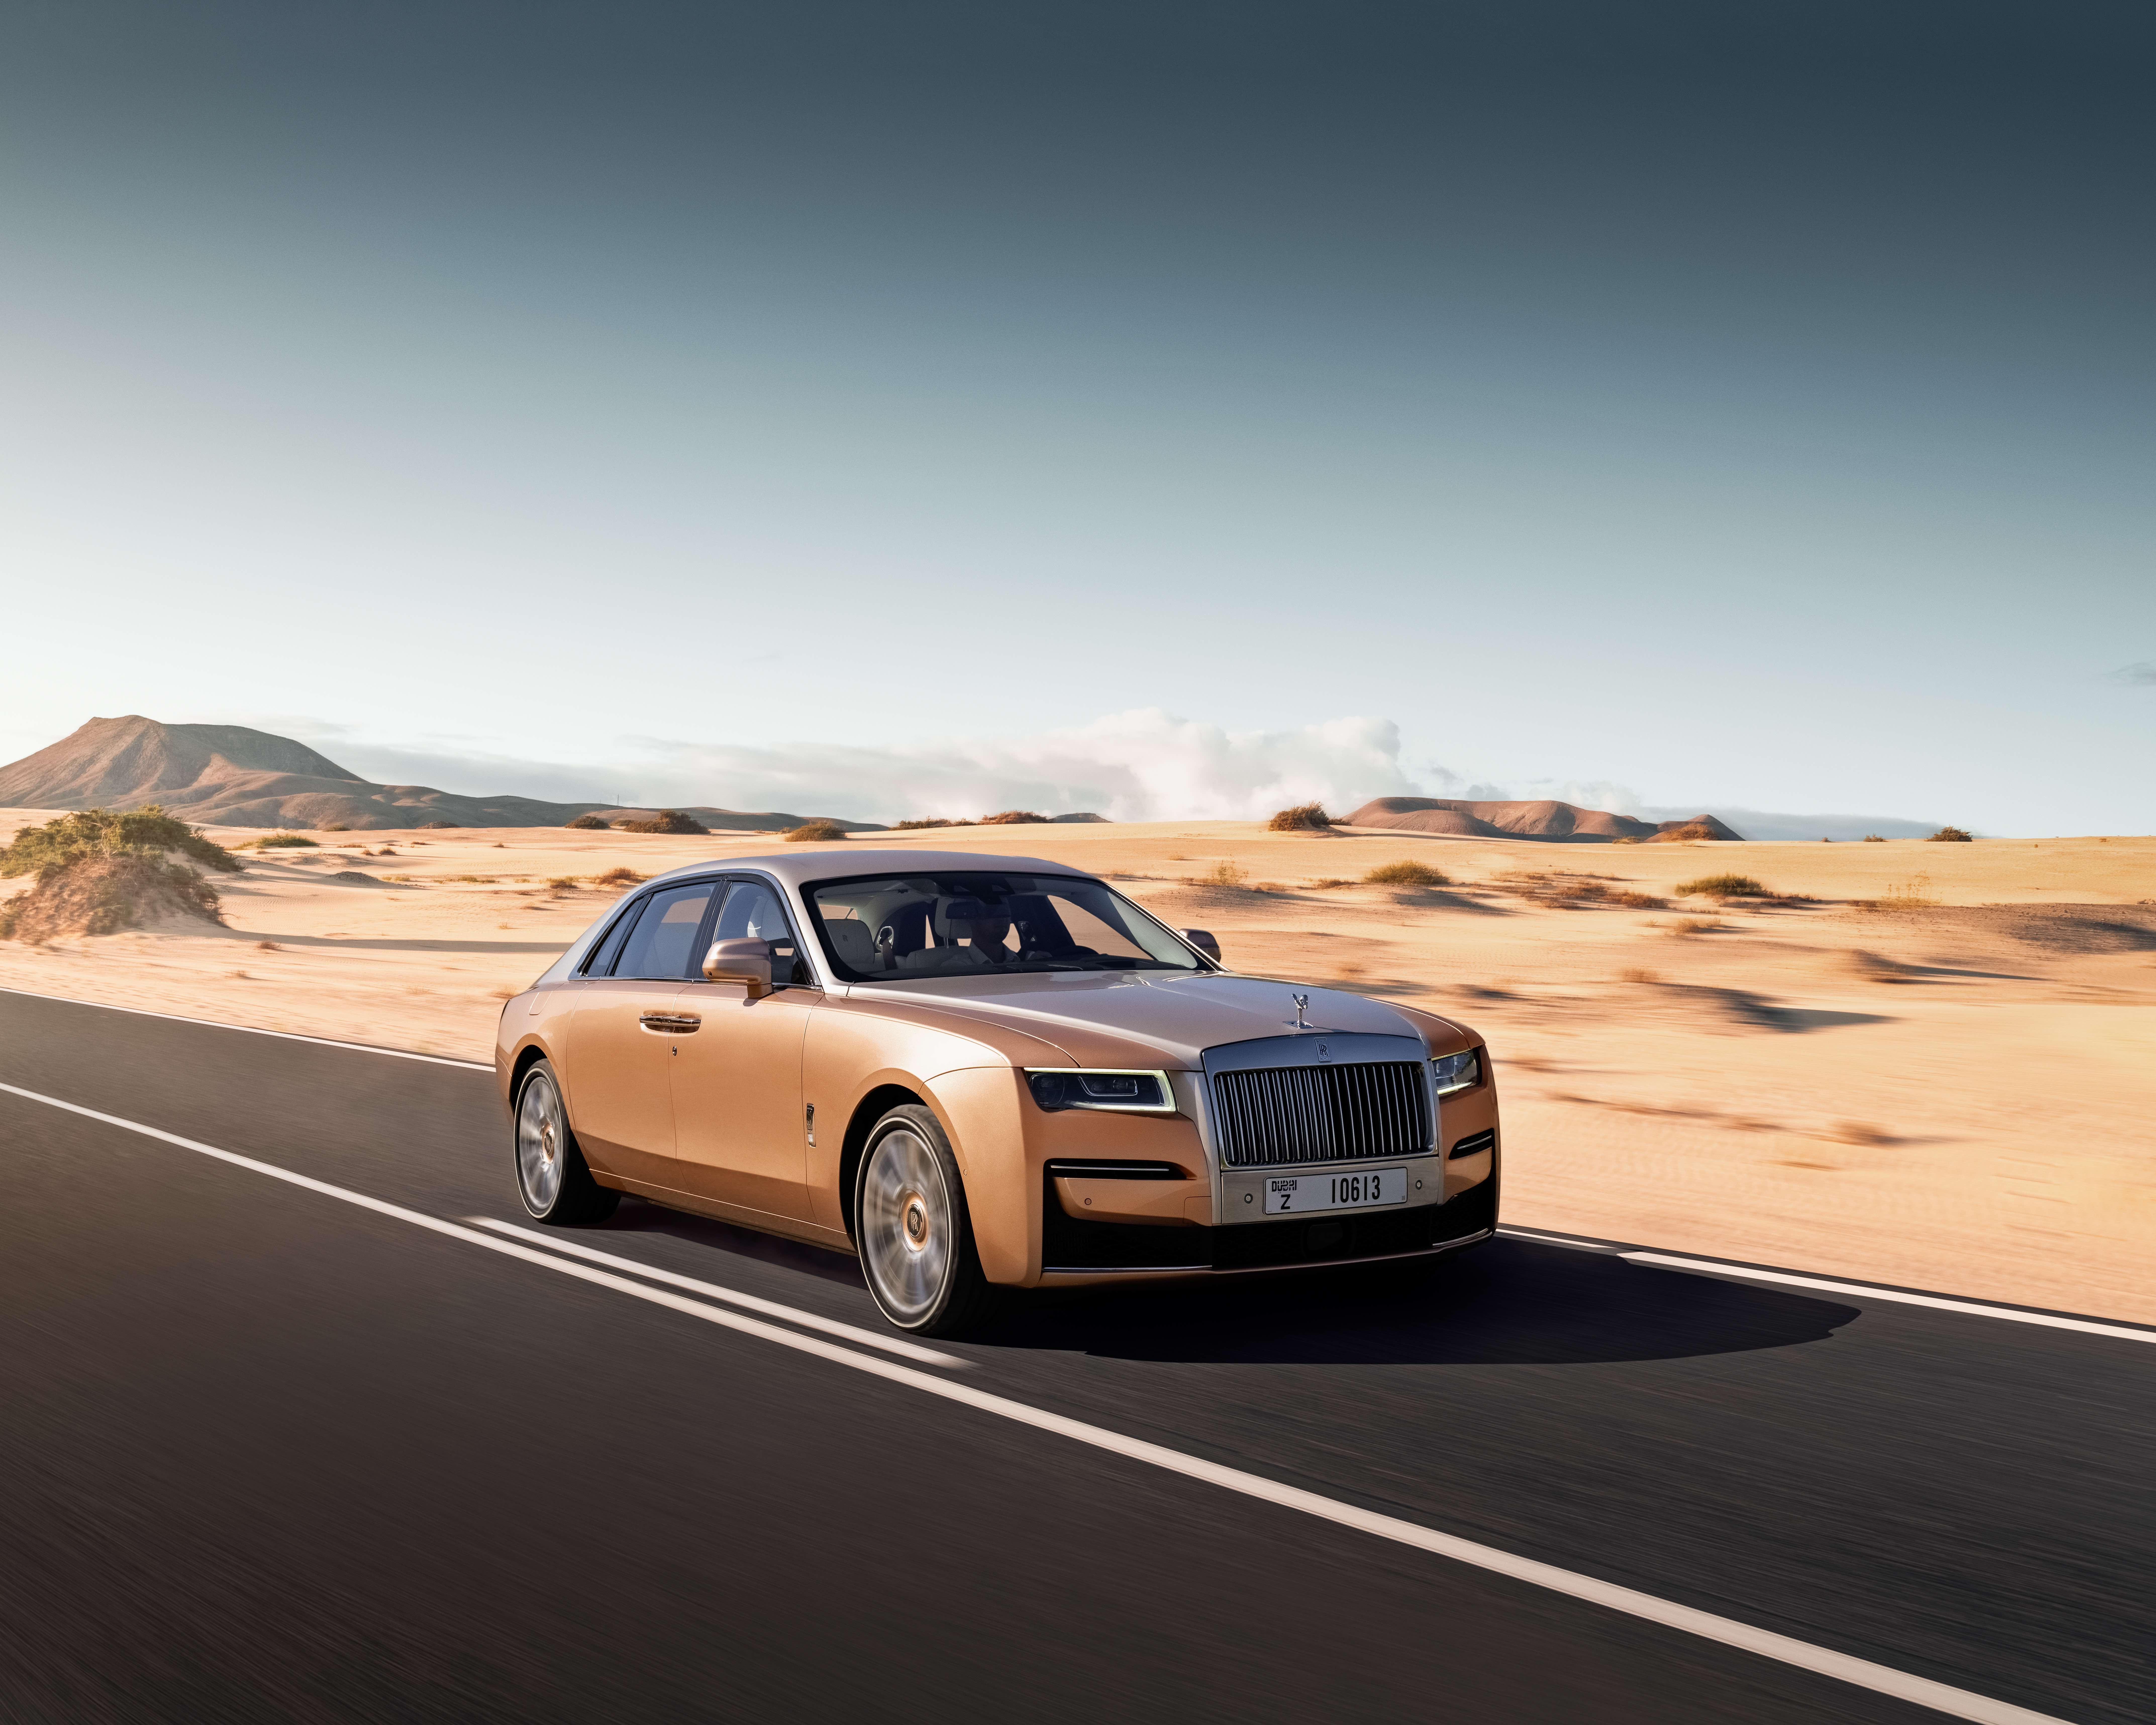 Rolls Royce first electric car Spectre unveiled South Korea check price  features colours new EV cars latest news  Rolls News  India TV